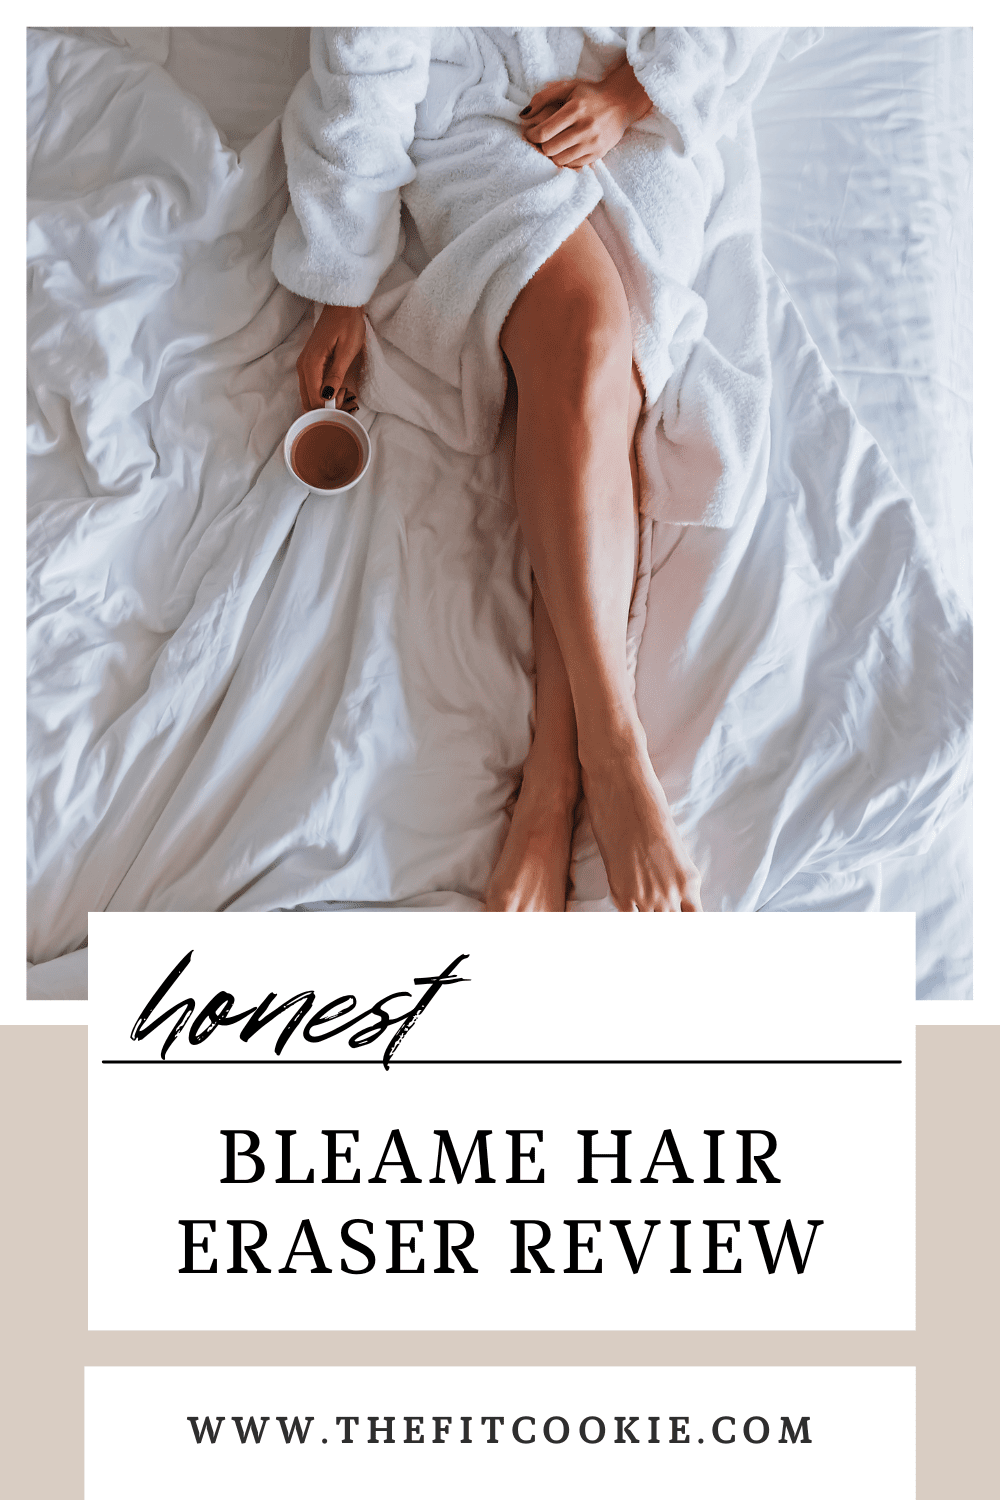 photo of woman in a bathrobe on a bad with coffee, there is text overlay on the image that says "honest bleame hair eraser review".